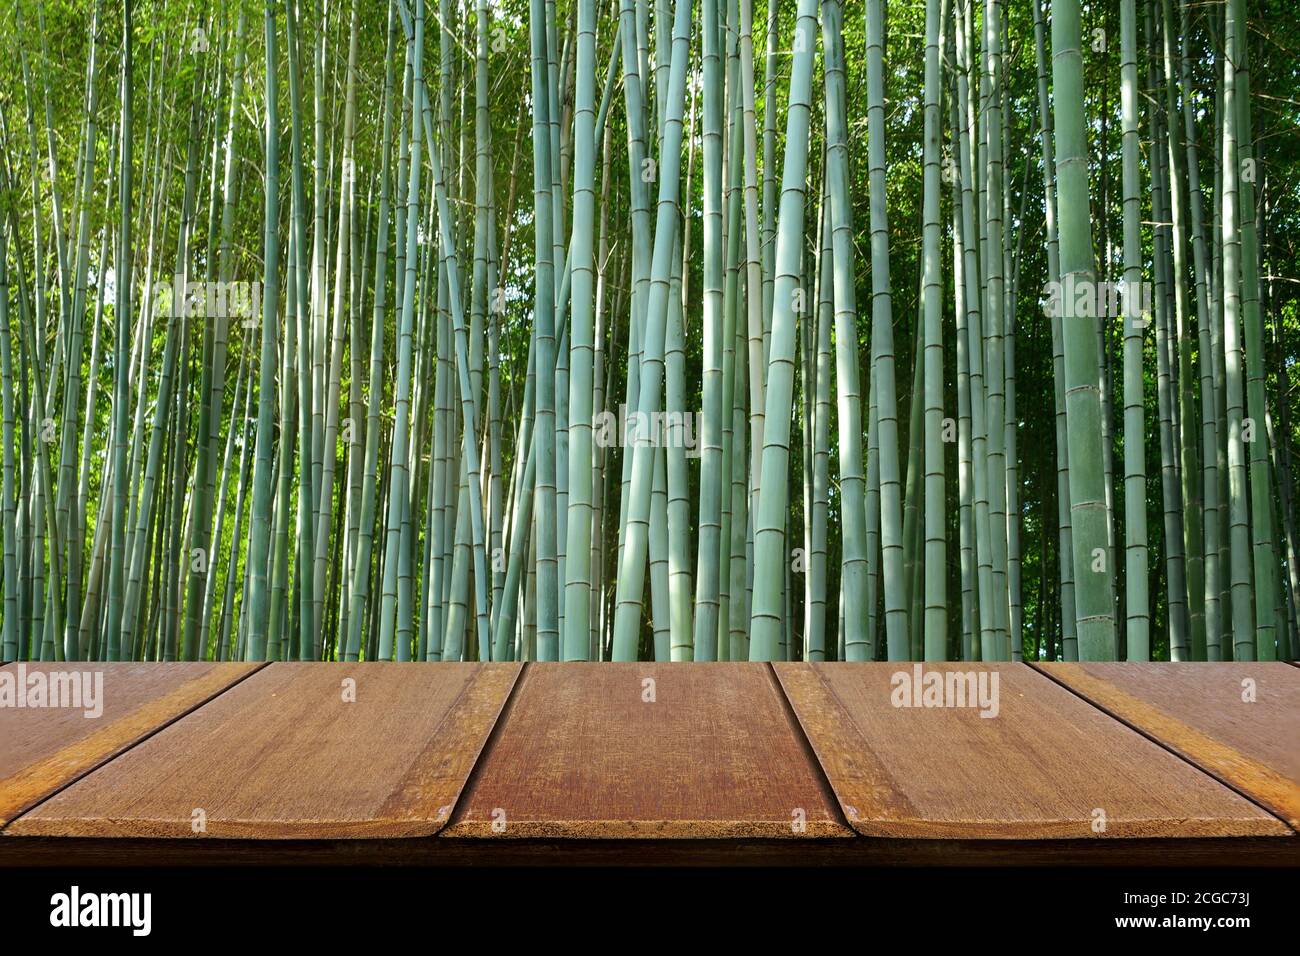 Bamboo forest background with wood table photo montage for product display. Background of Arashiyama The famous bamboo forest in Kyoto, Japan. Stock Photo